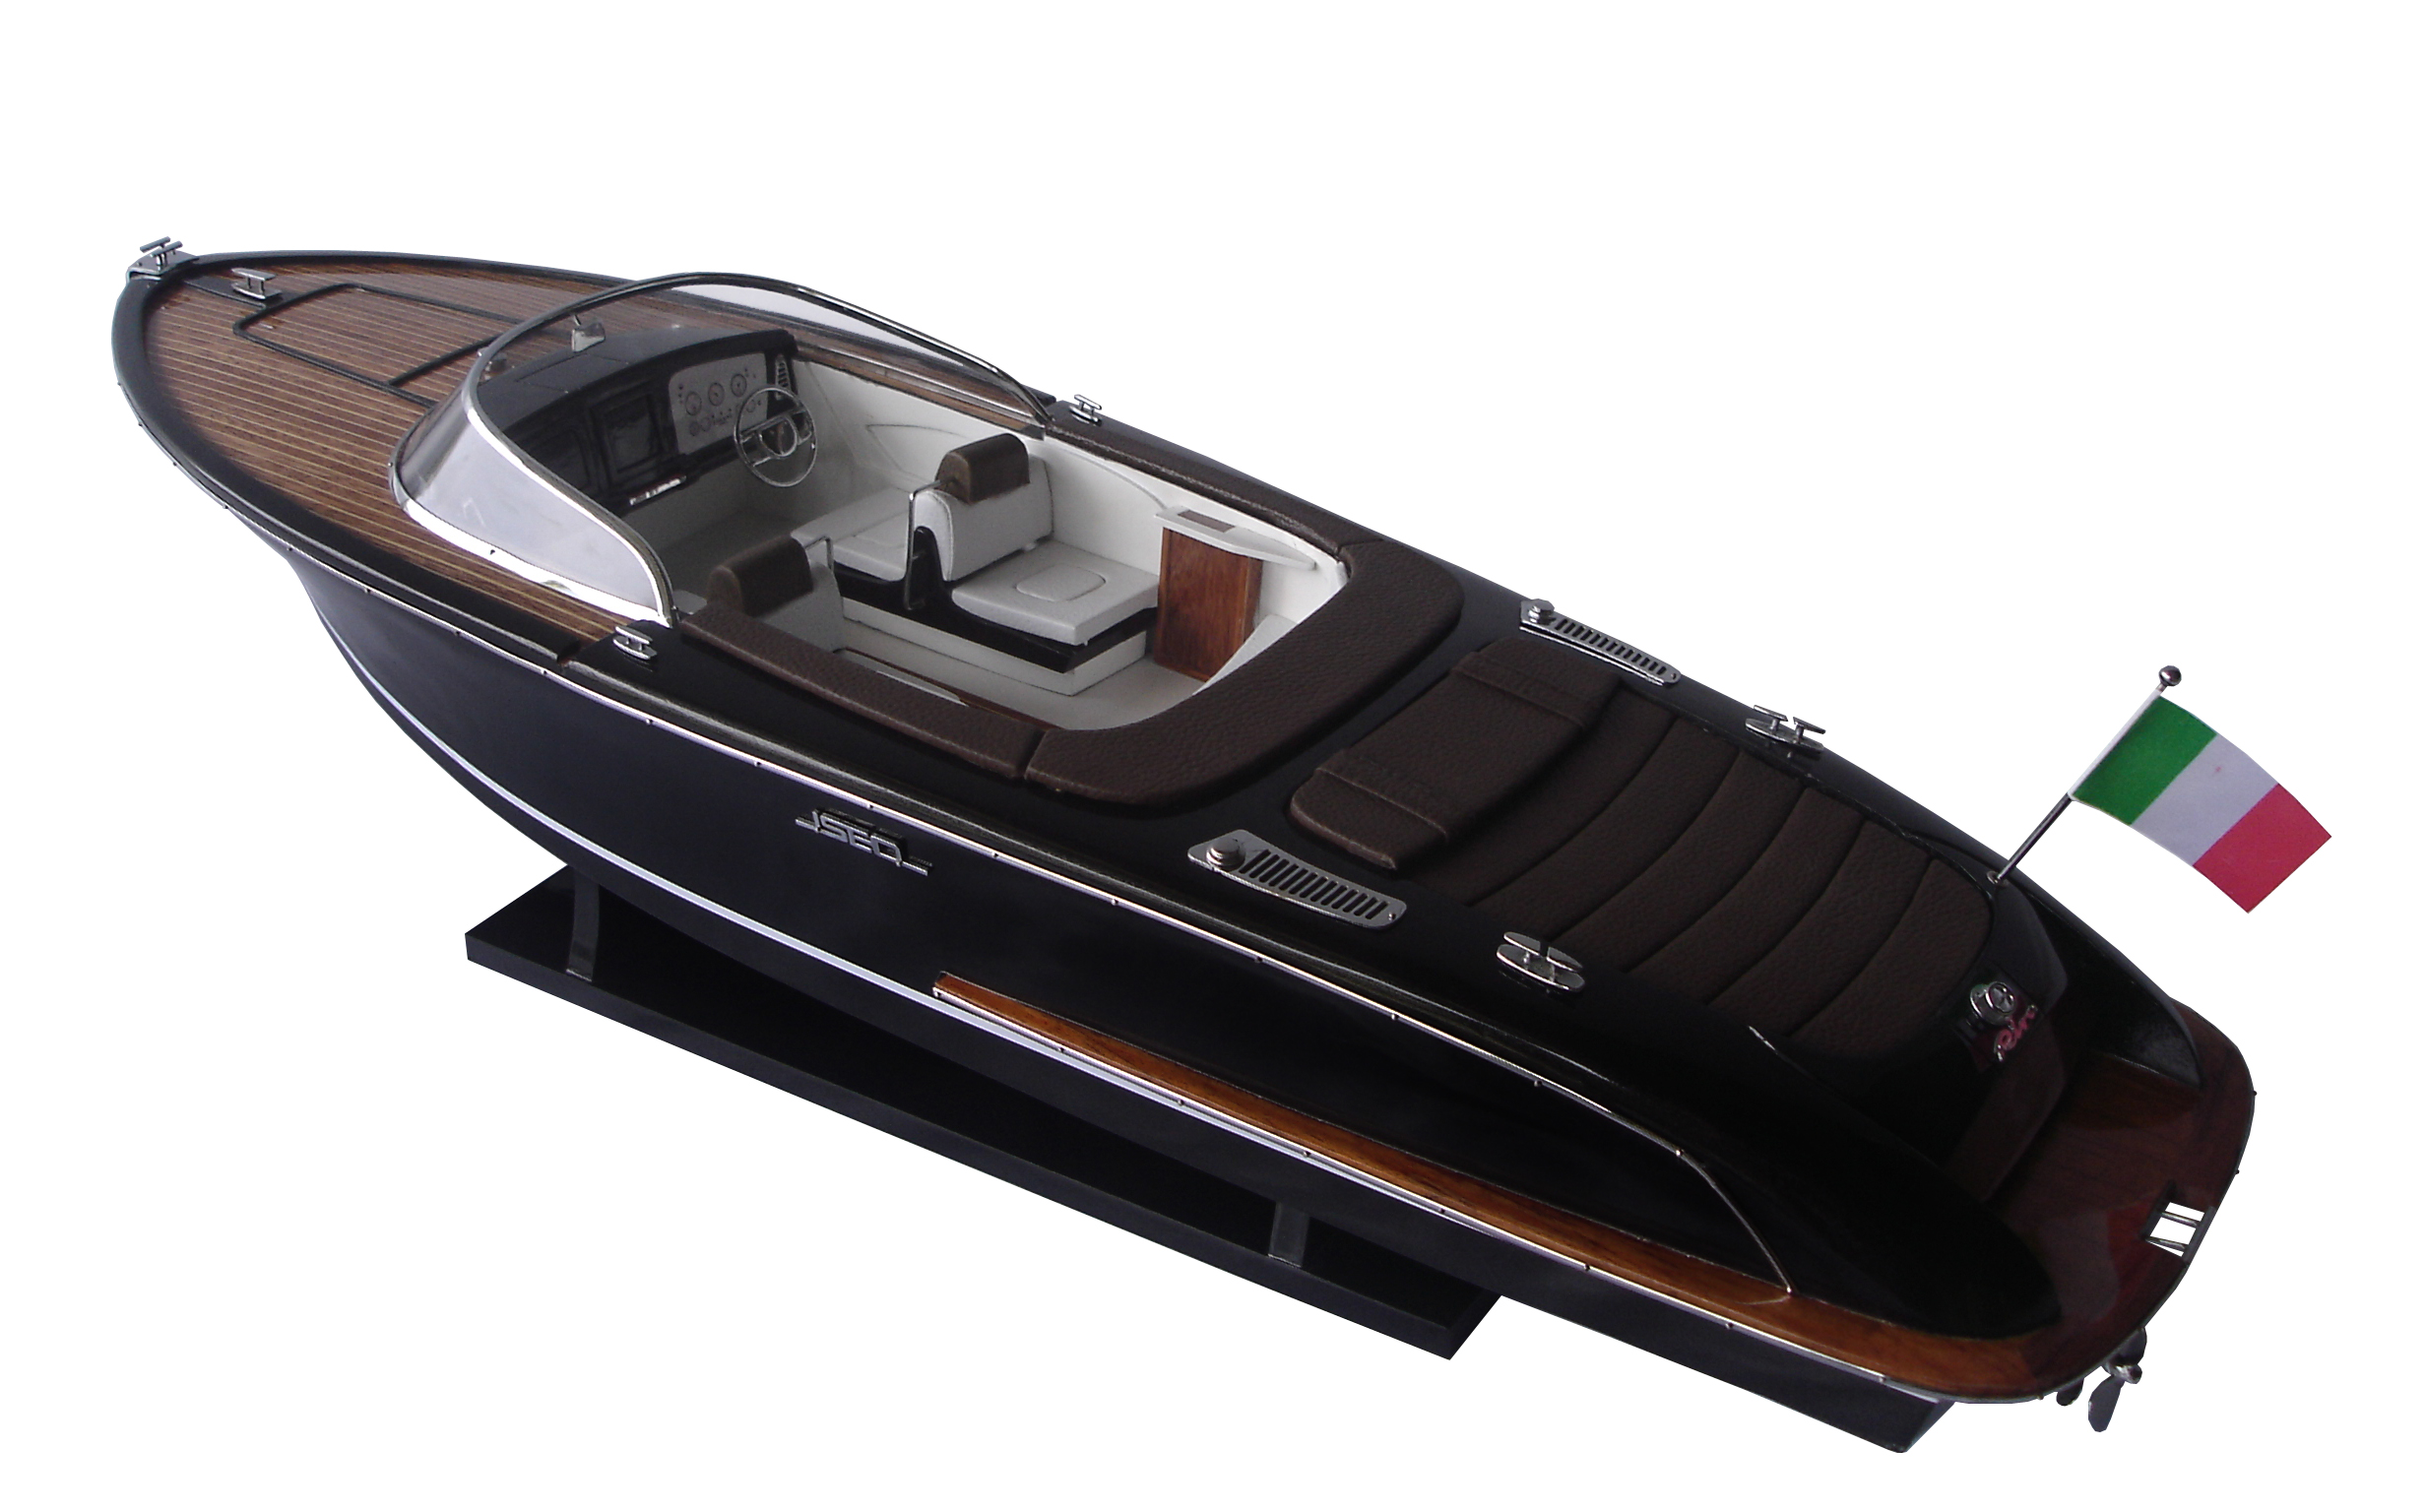 Classic Speed Boat Riva Iseo Model Lenght 82